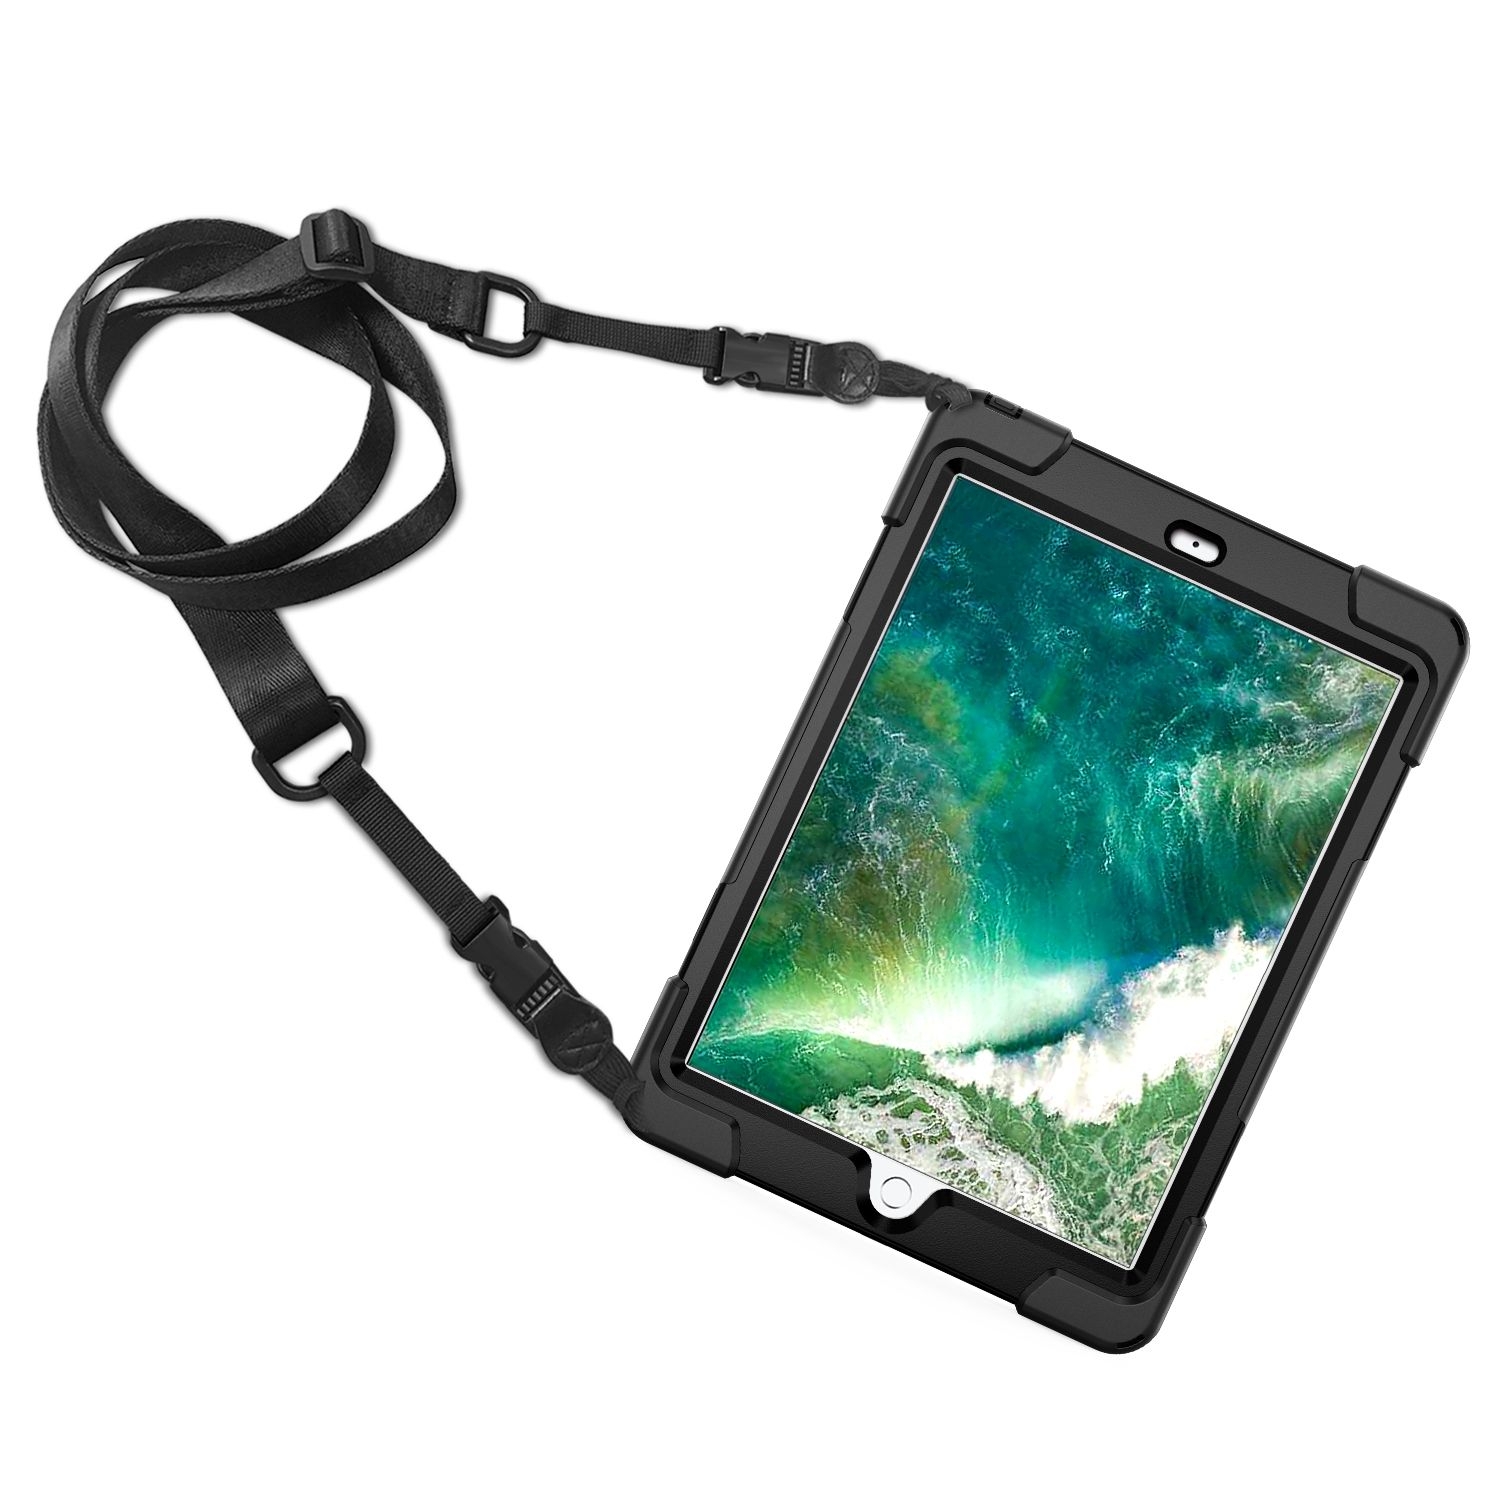 Rugged case for the iPad 2018 9.7 with hand & shoulder strap, kick stand and glass screen protector